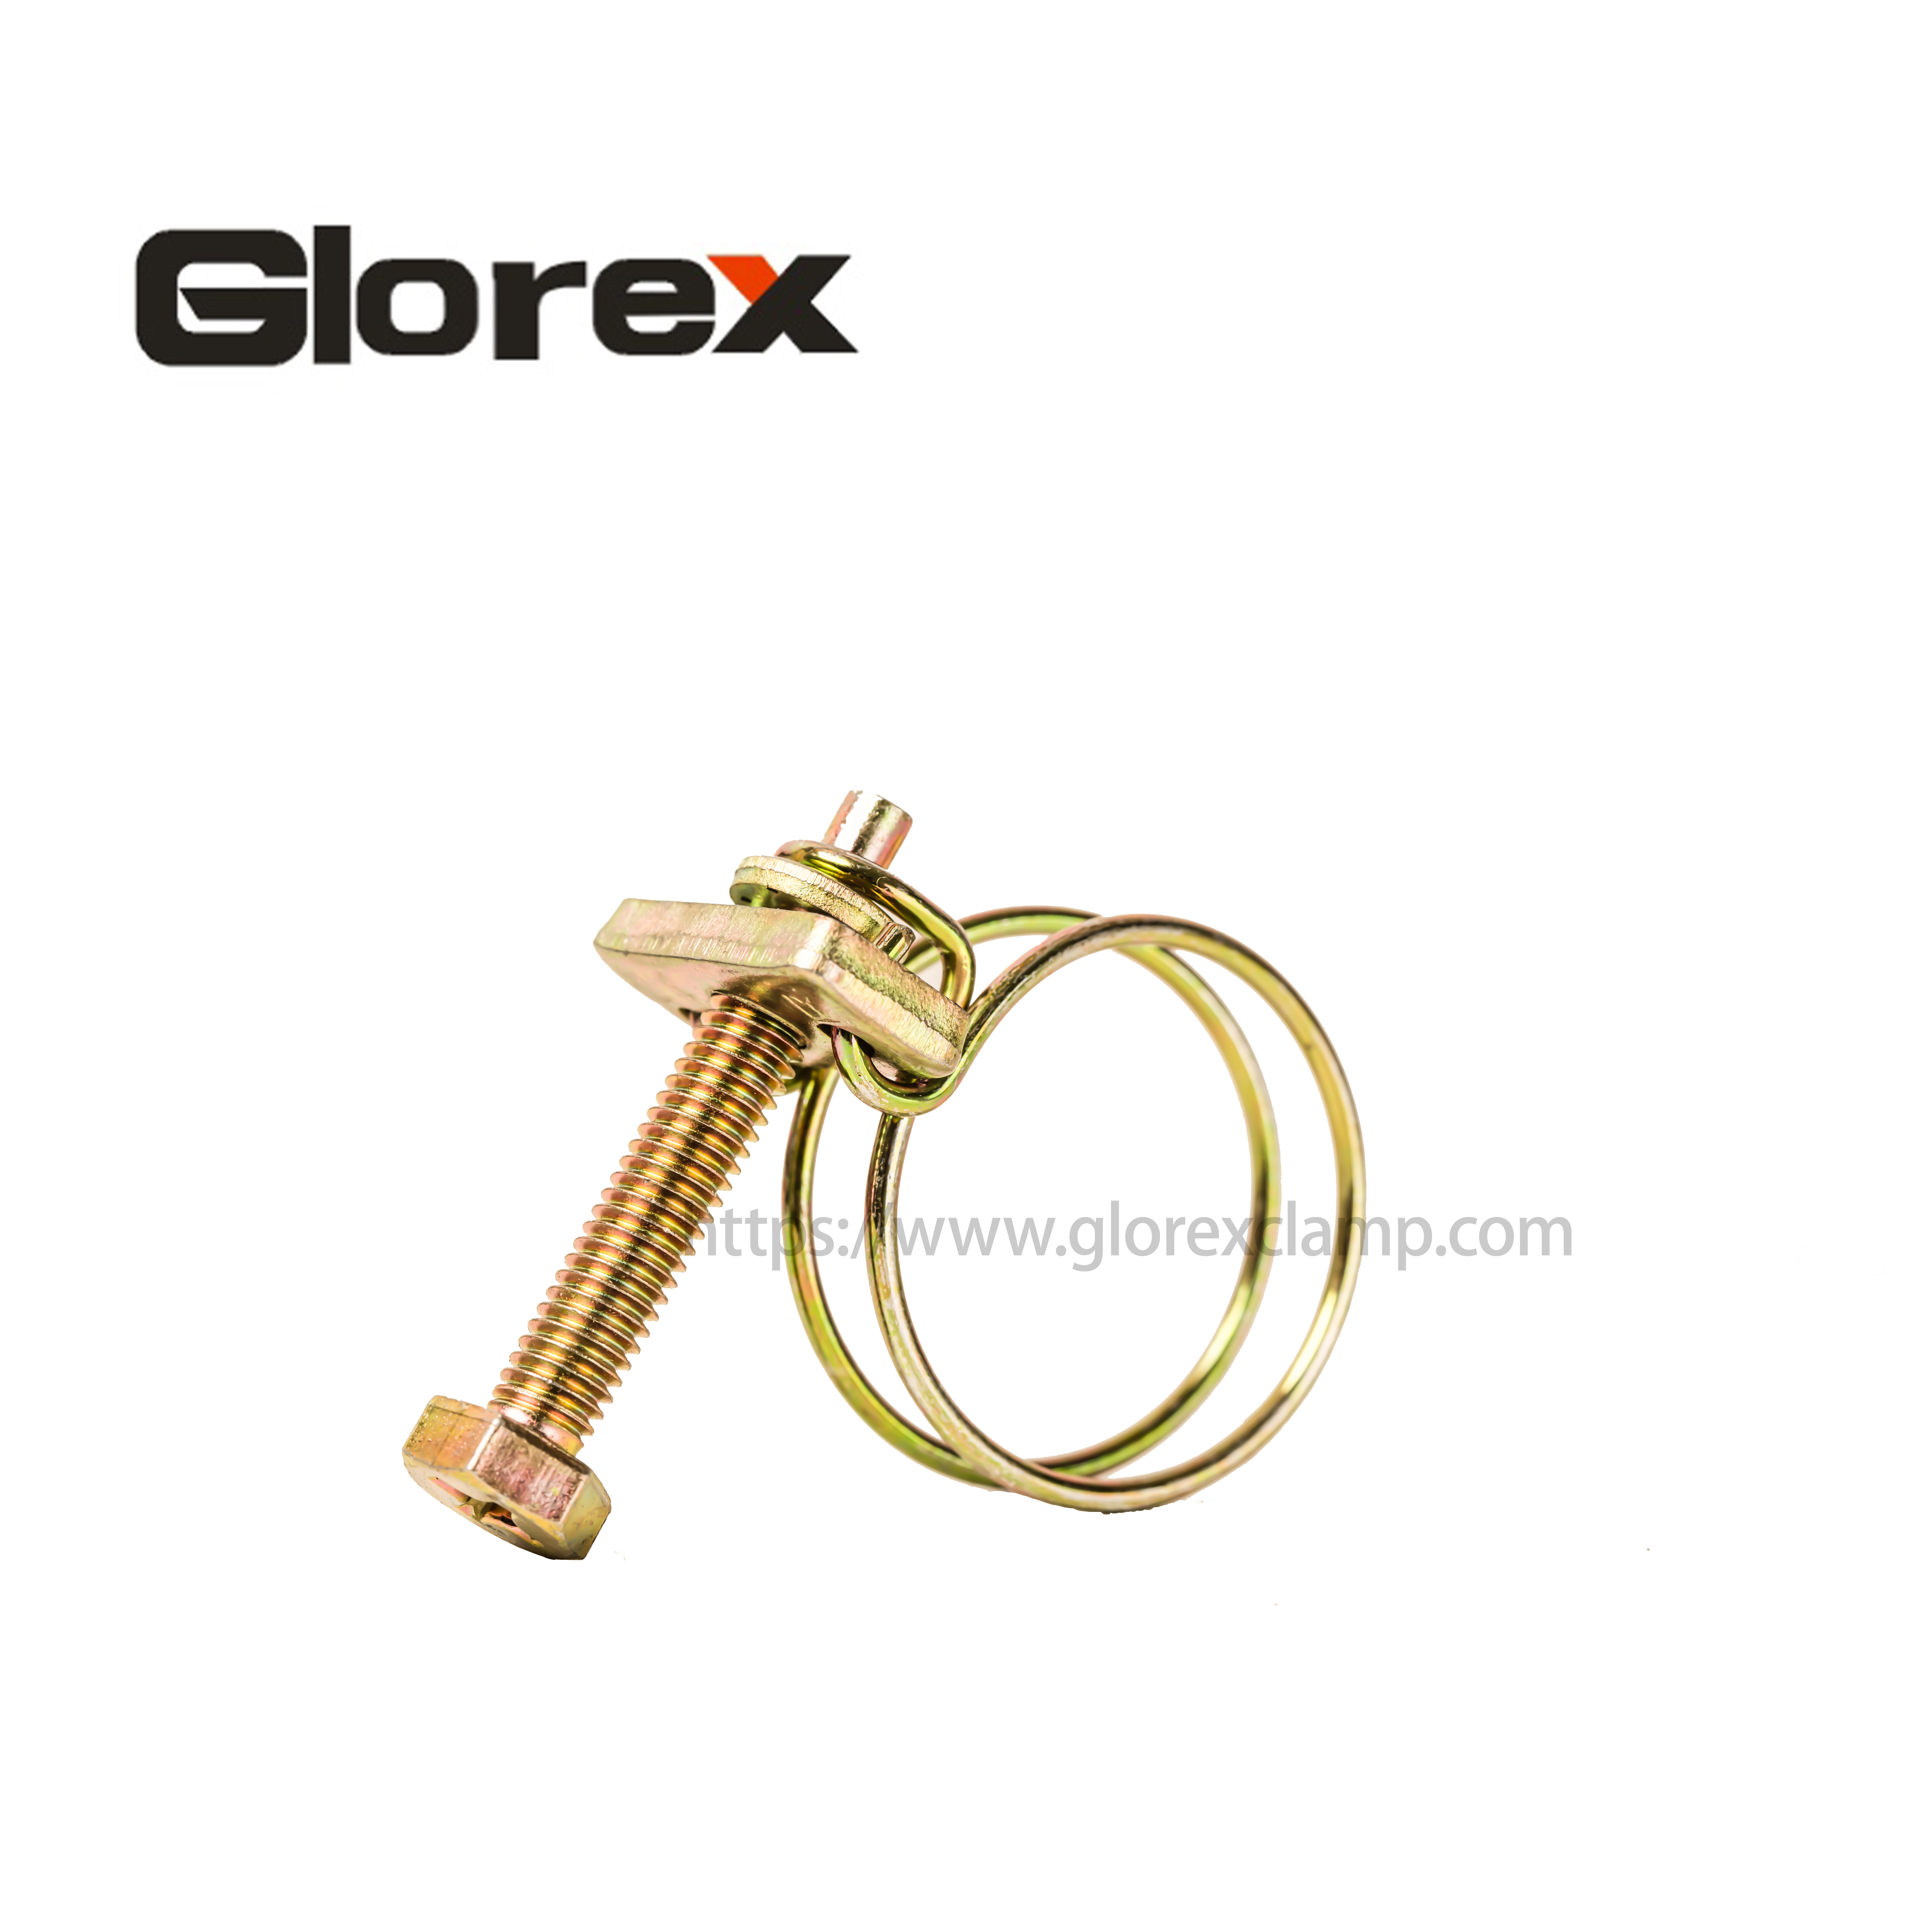 Cheapest Price Metal Clips - Double wire hose clamp – Glorex